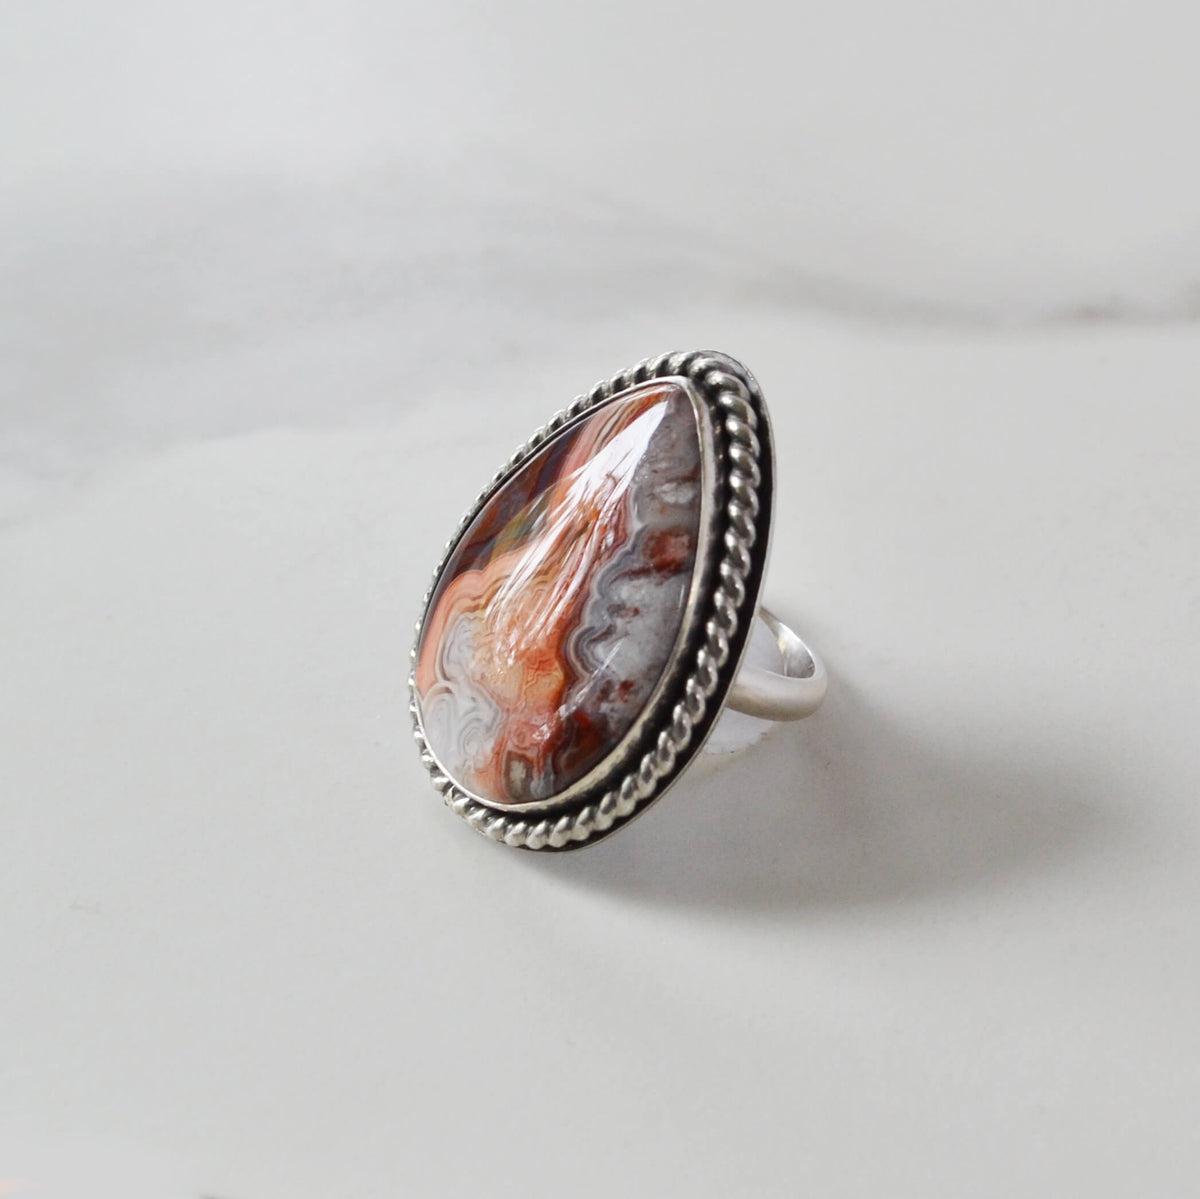 Laguna Lace Pear Shaped Agate Sterling Silver Ring, One of a Kind